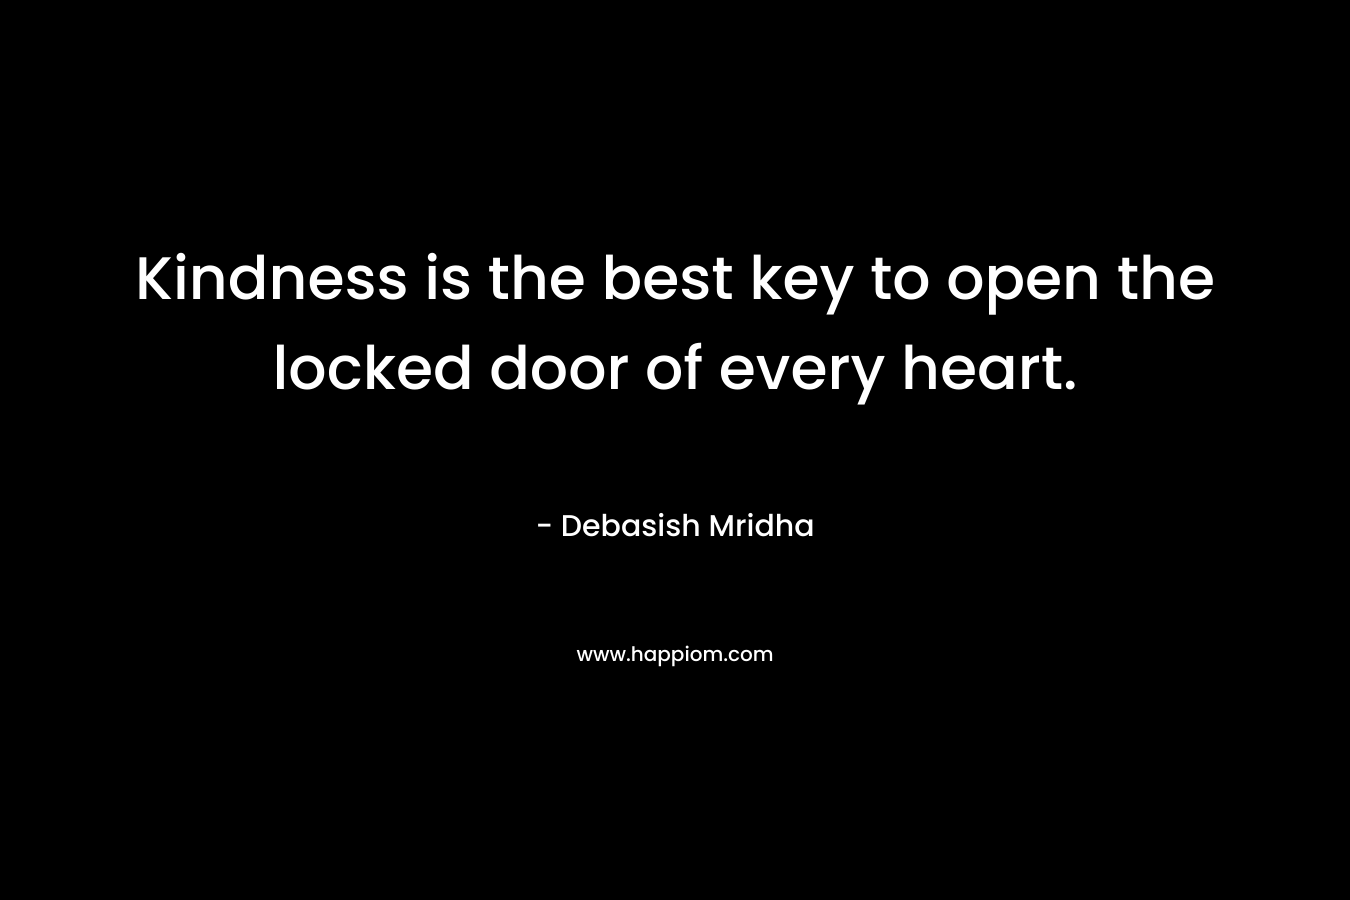 Kindness is the best key to open the locked door of every heart.